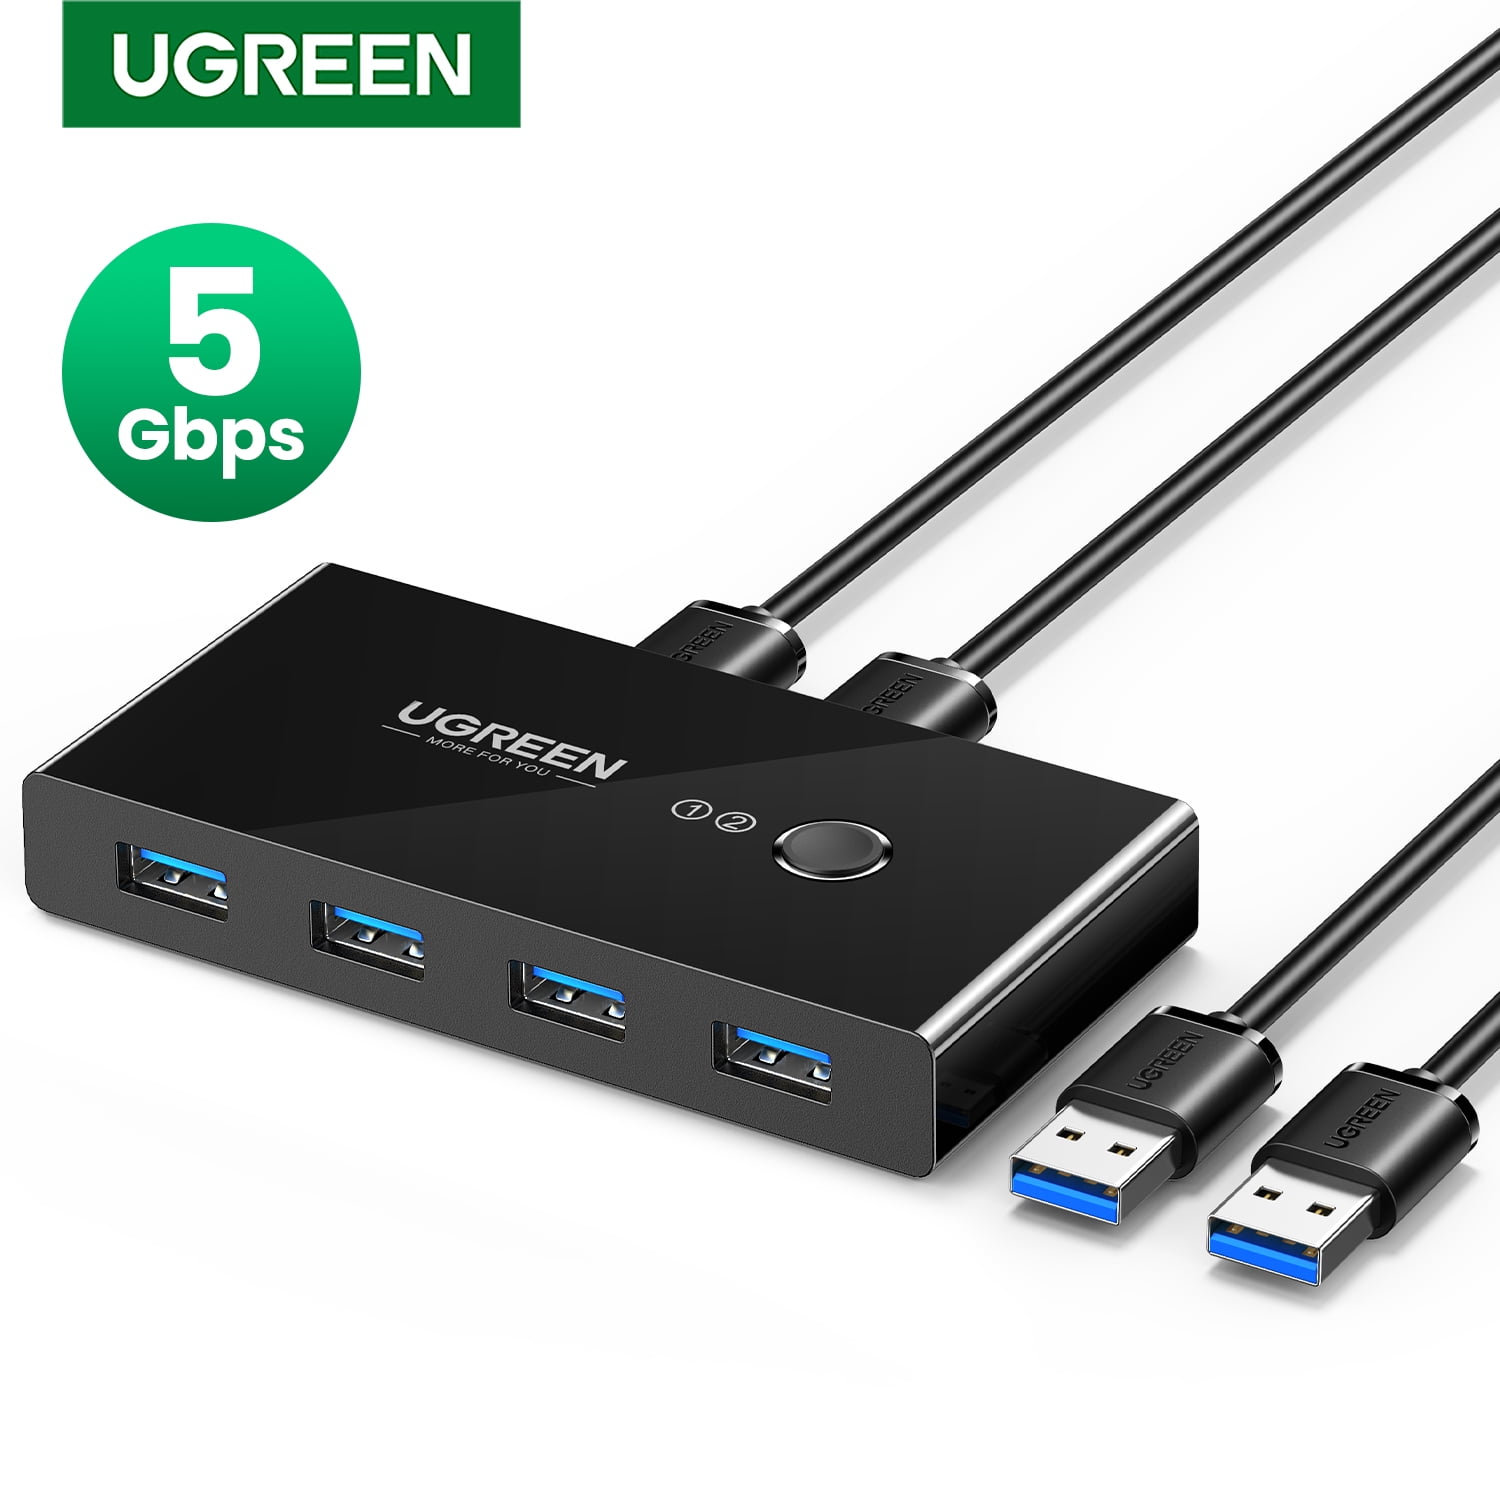 UGREEN USB Switch Selector 2 Computers Sharing USB Devices USB 2.0 Peripheral Switcher Box Hub with 2 Pack Cables Black - Walmart.com